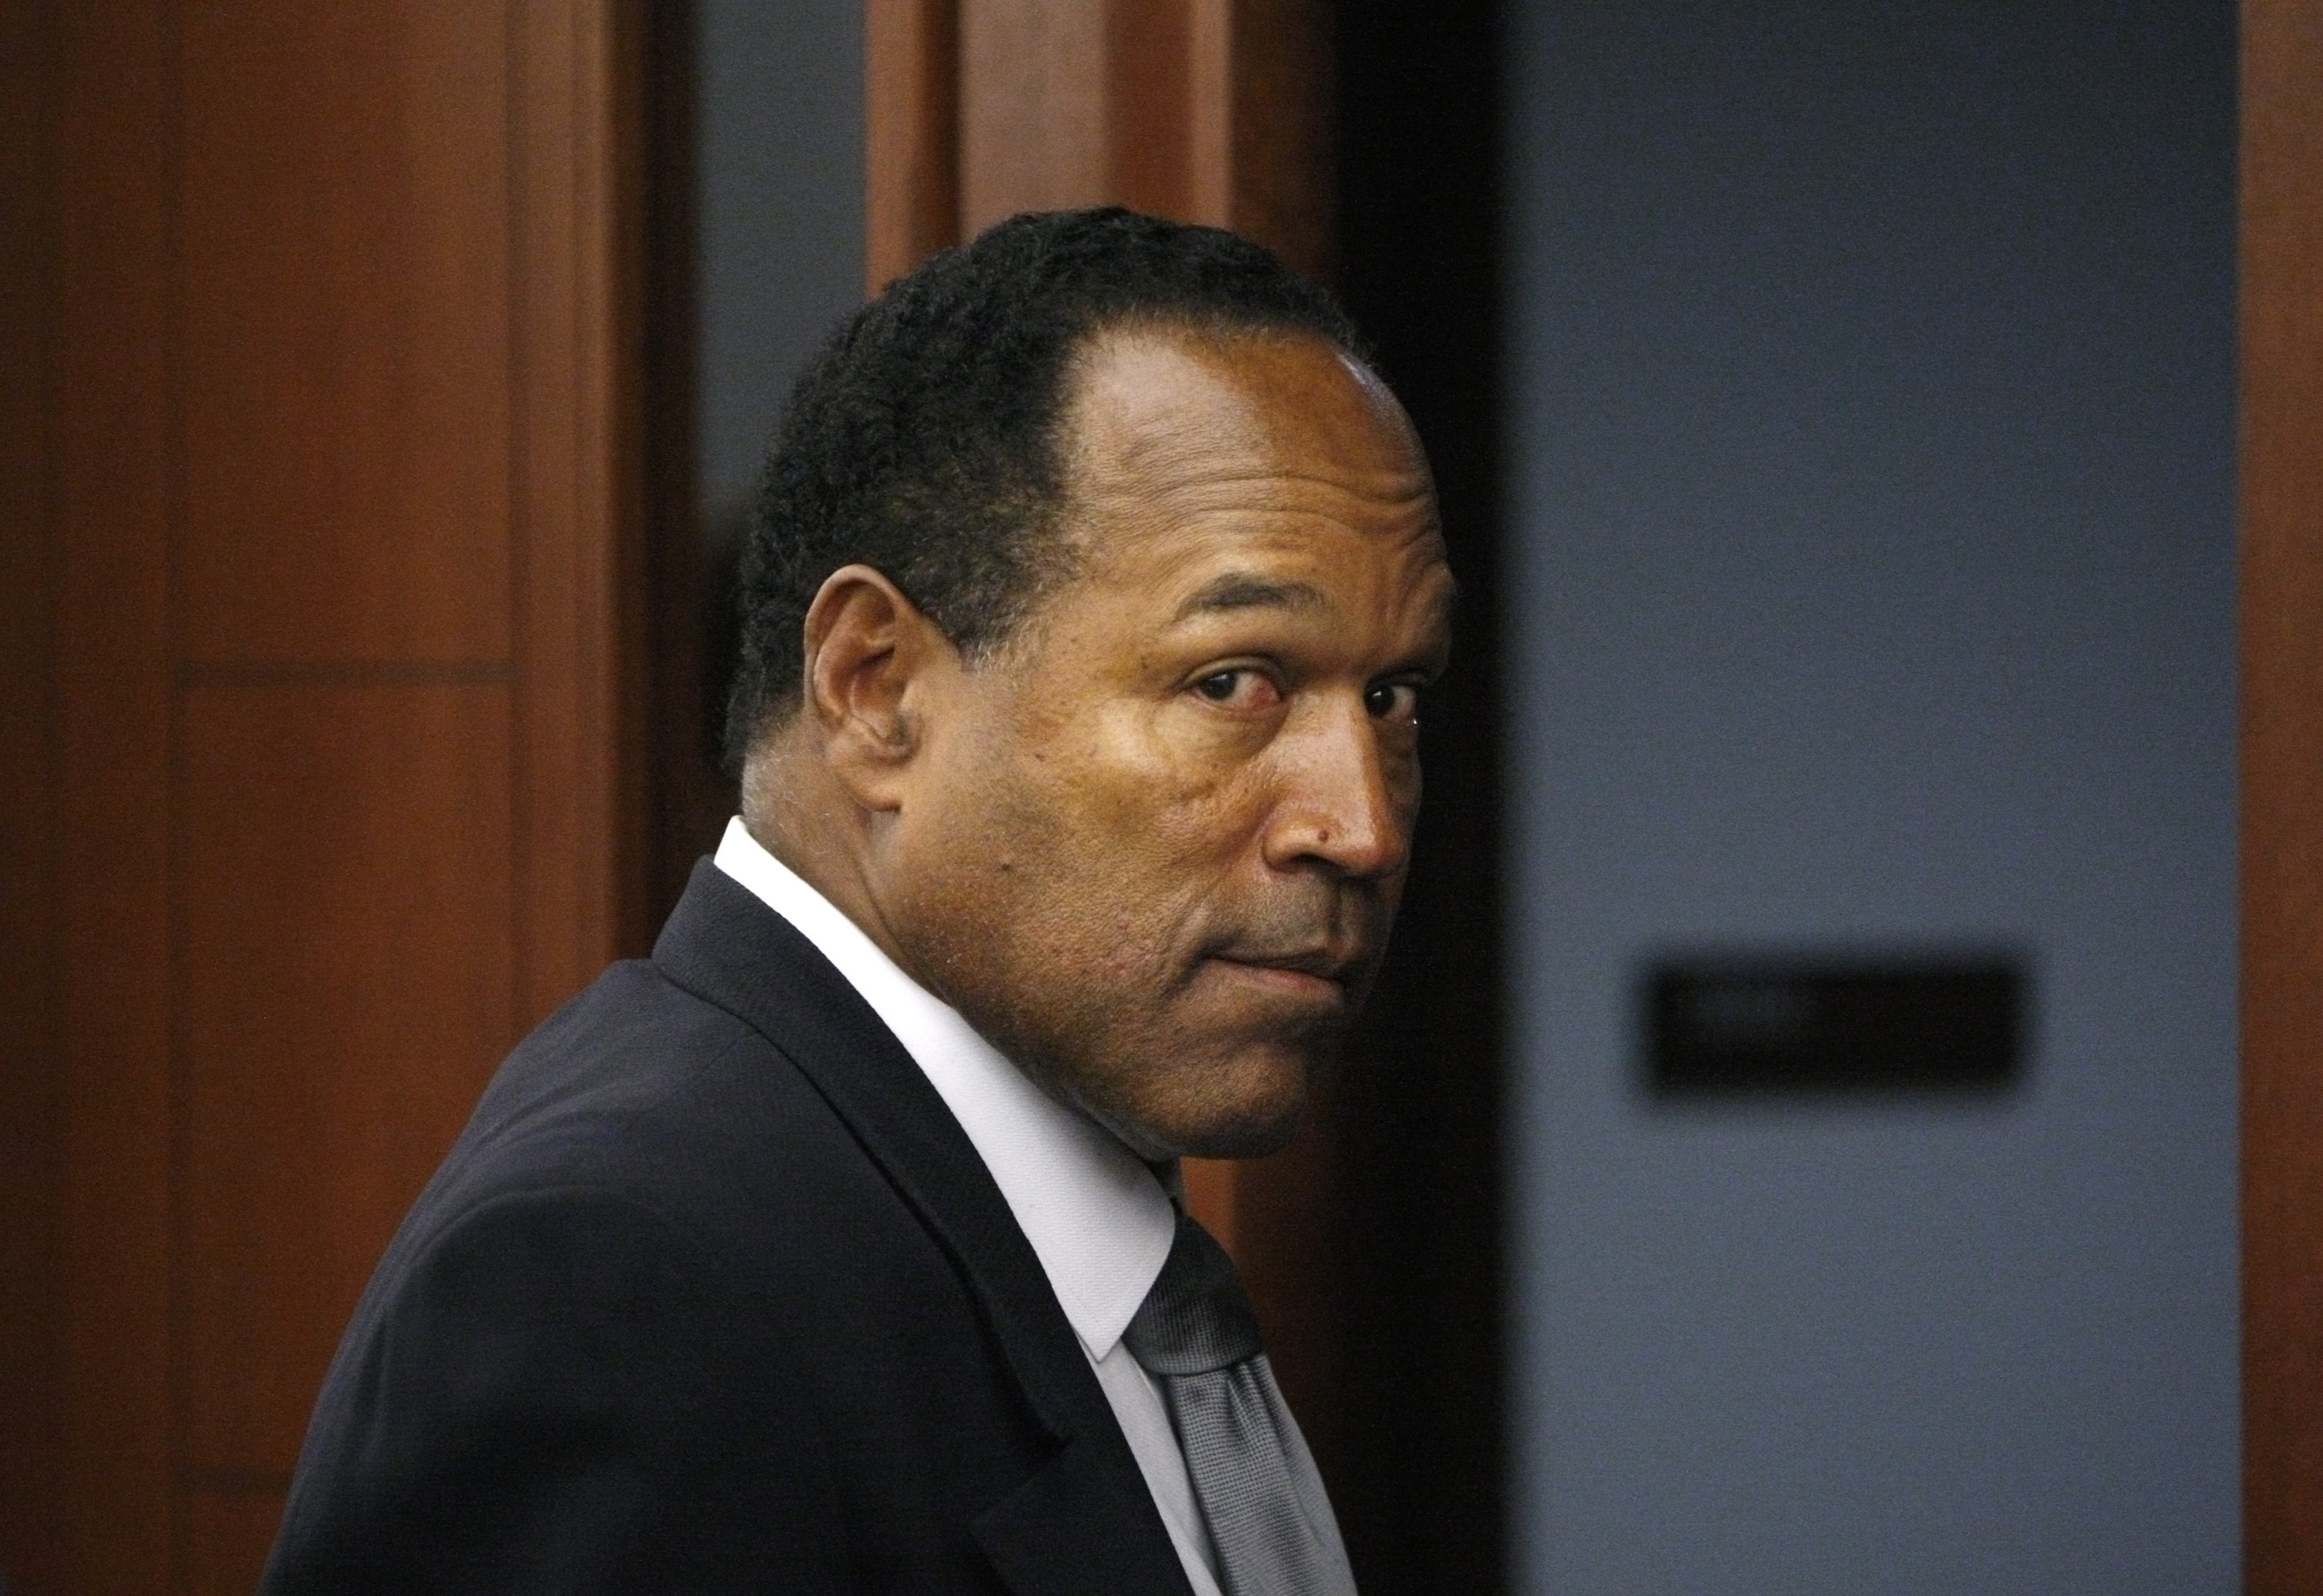 O.J. Simpson leaves the courtroom in Las Vegas Nevada